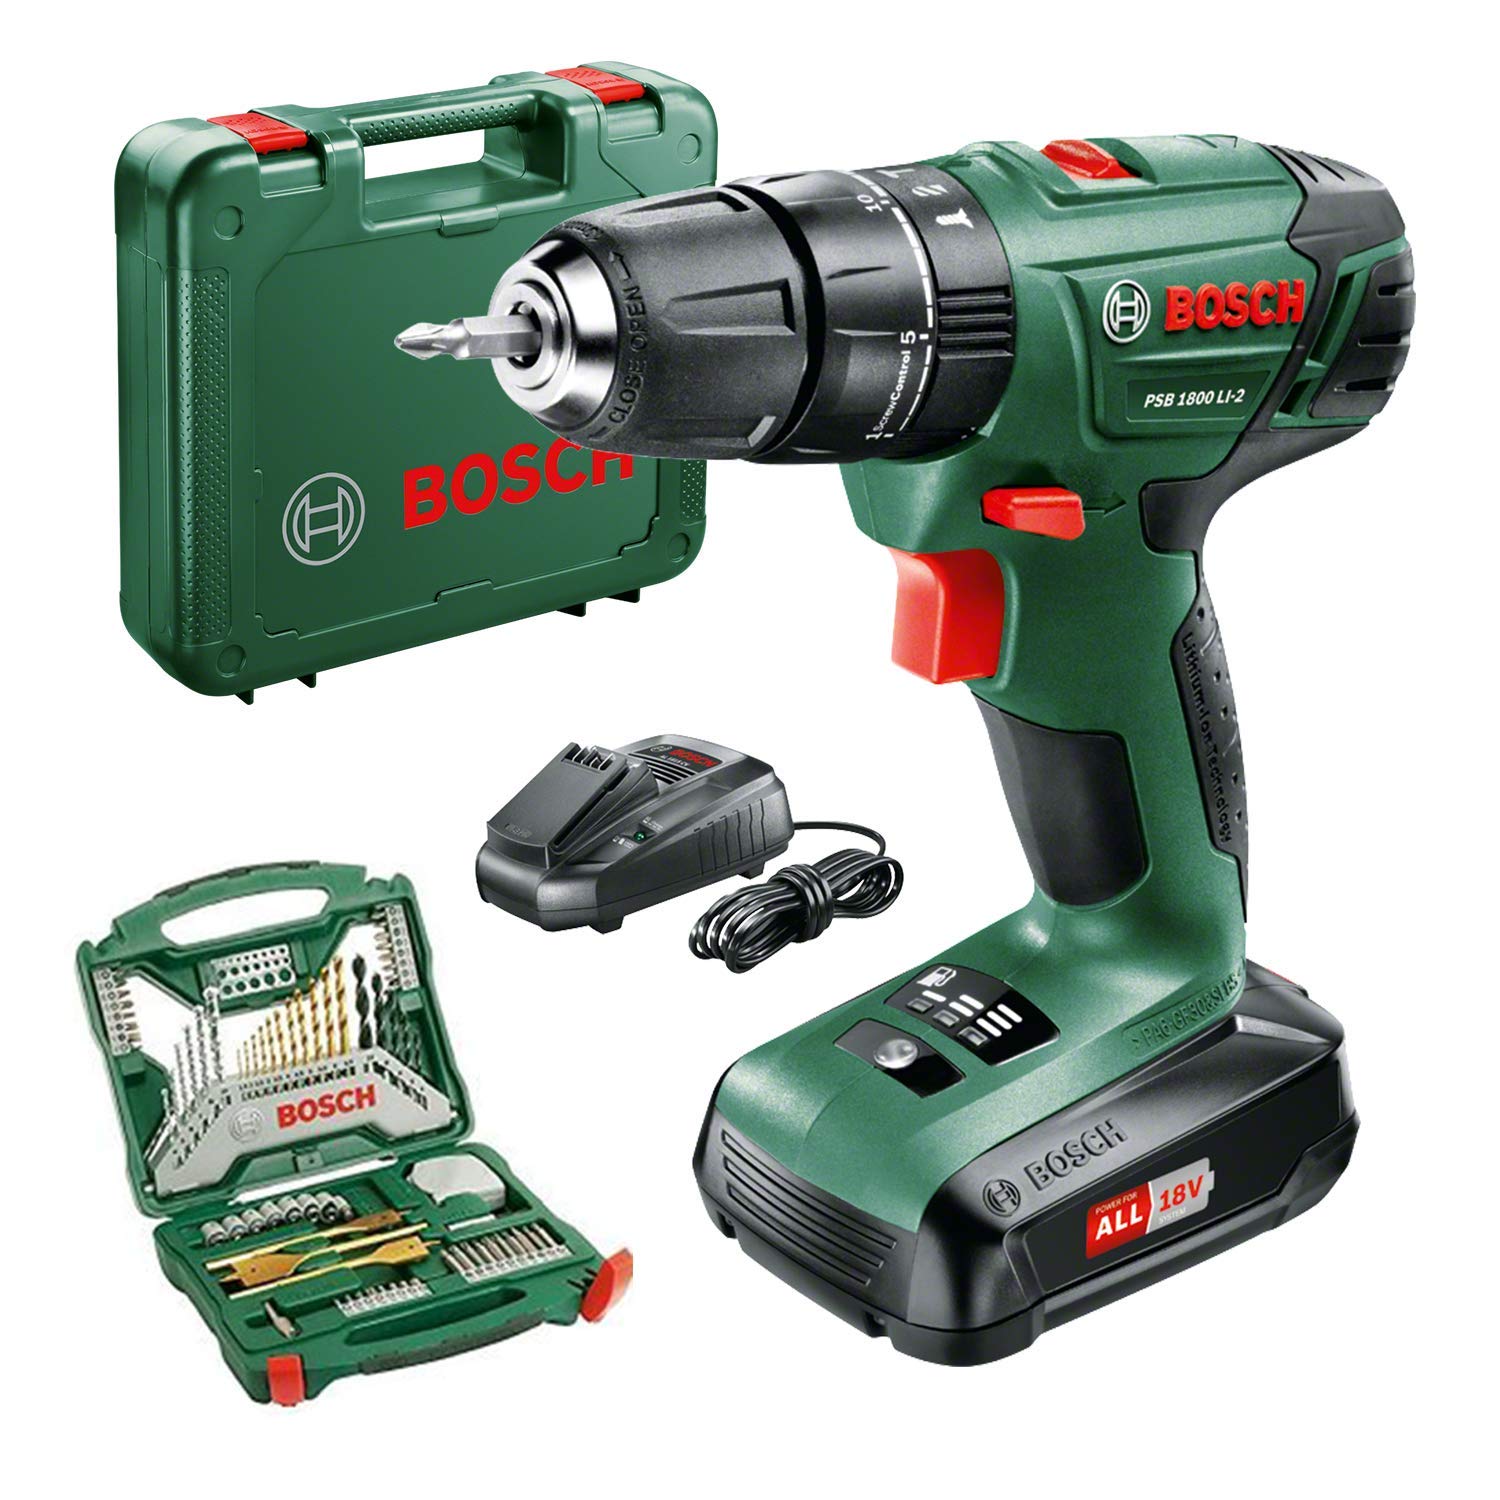 Bosch PSB 1800 LI-2 Cordless Combi Drill with two 18 V Lithium-Ion Battery with a 70 Piece Accessory Set